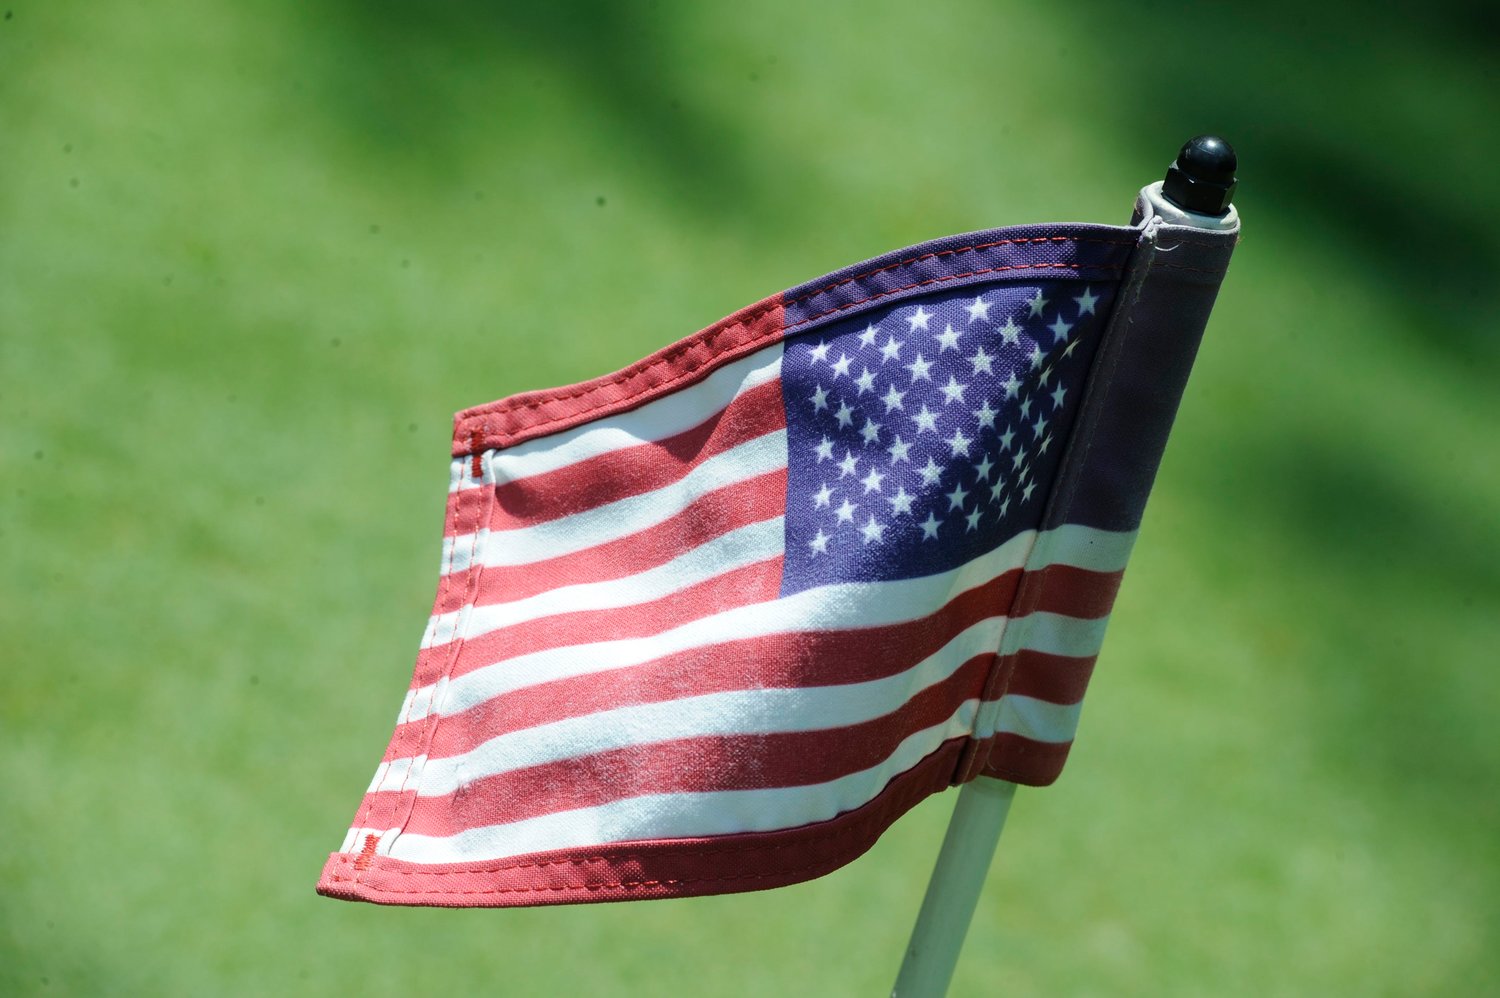 Signs of things to come. On Monday, August 31, the Country Club at Woodloch Springs will host the 7th Annual Folds of Honor Golf Classic. The Folds of Honor Foundation’s mission is dedicated to ensuring that “no family is left behind in the fight to preserve American freedom.” The small American Flag flies on the putting practice green by the clubhouse.